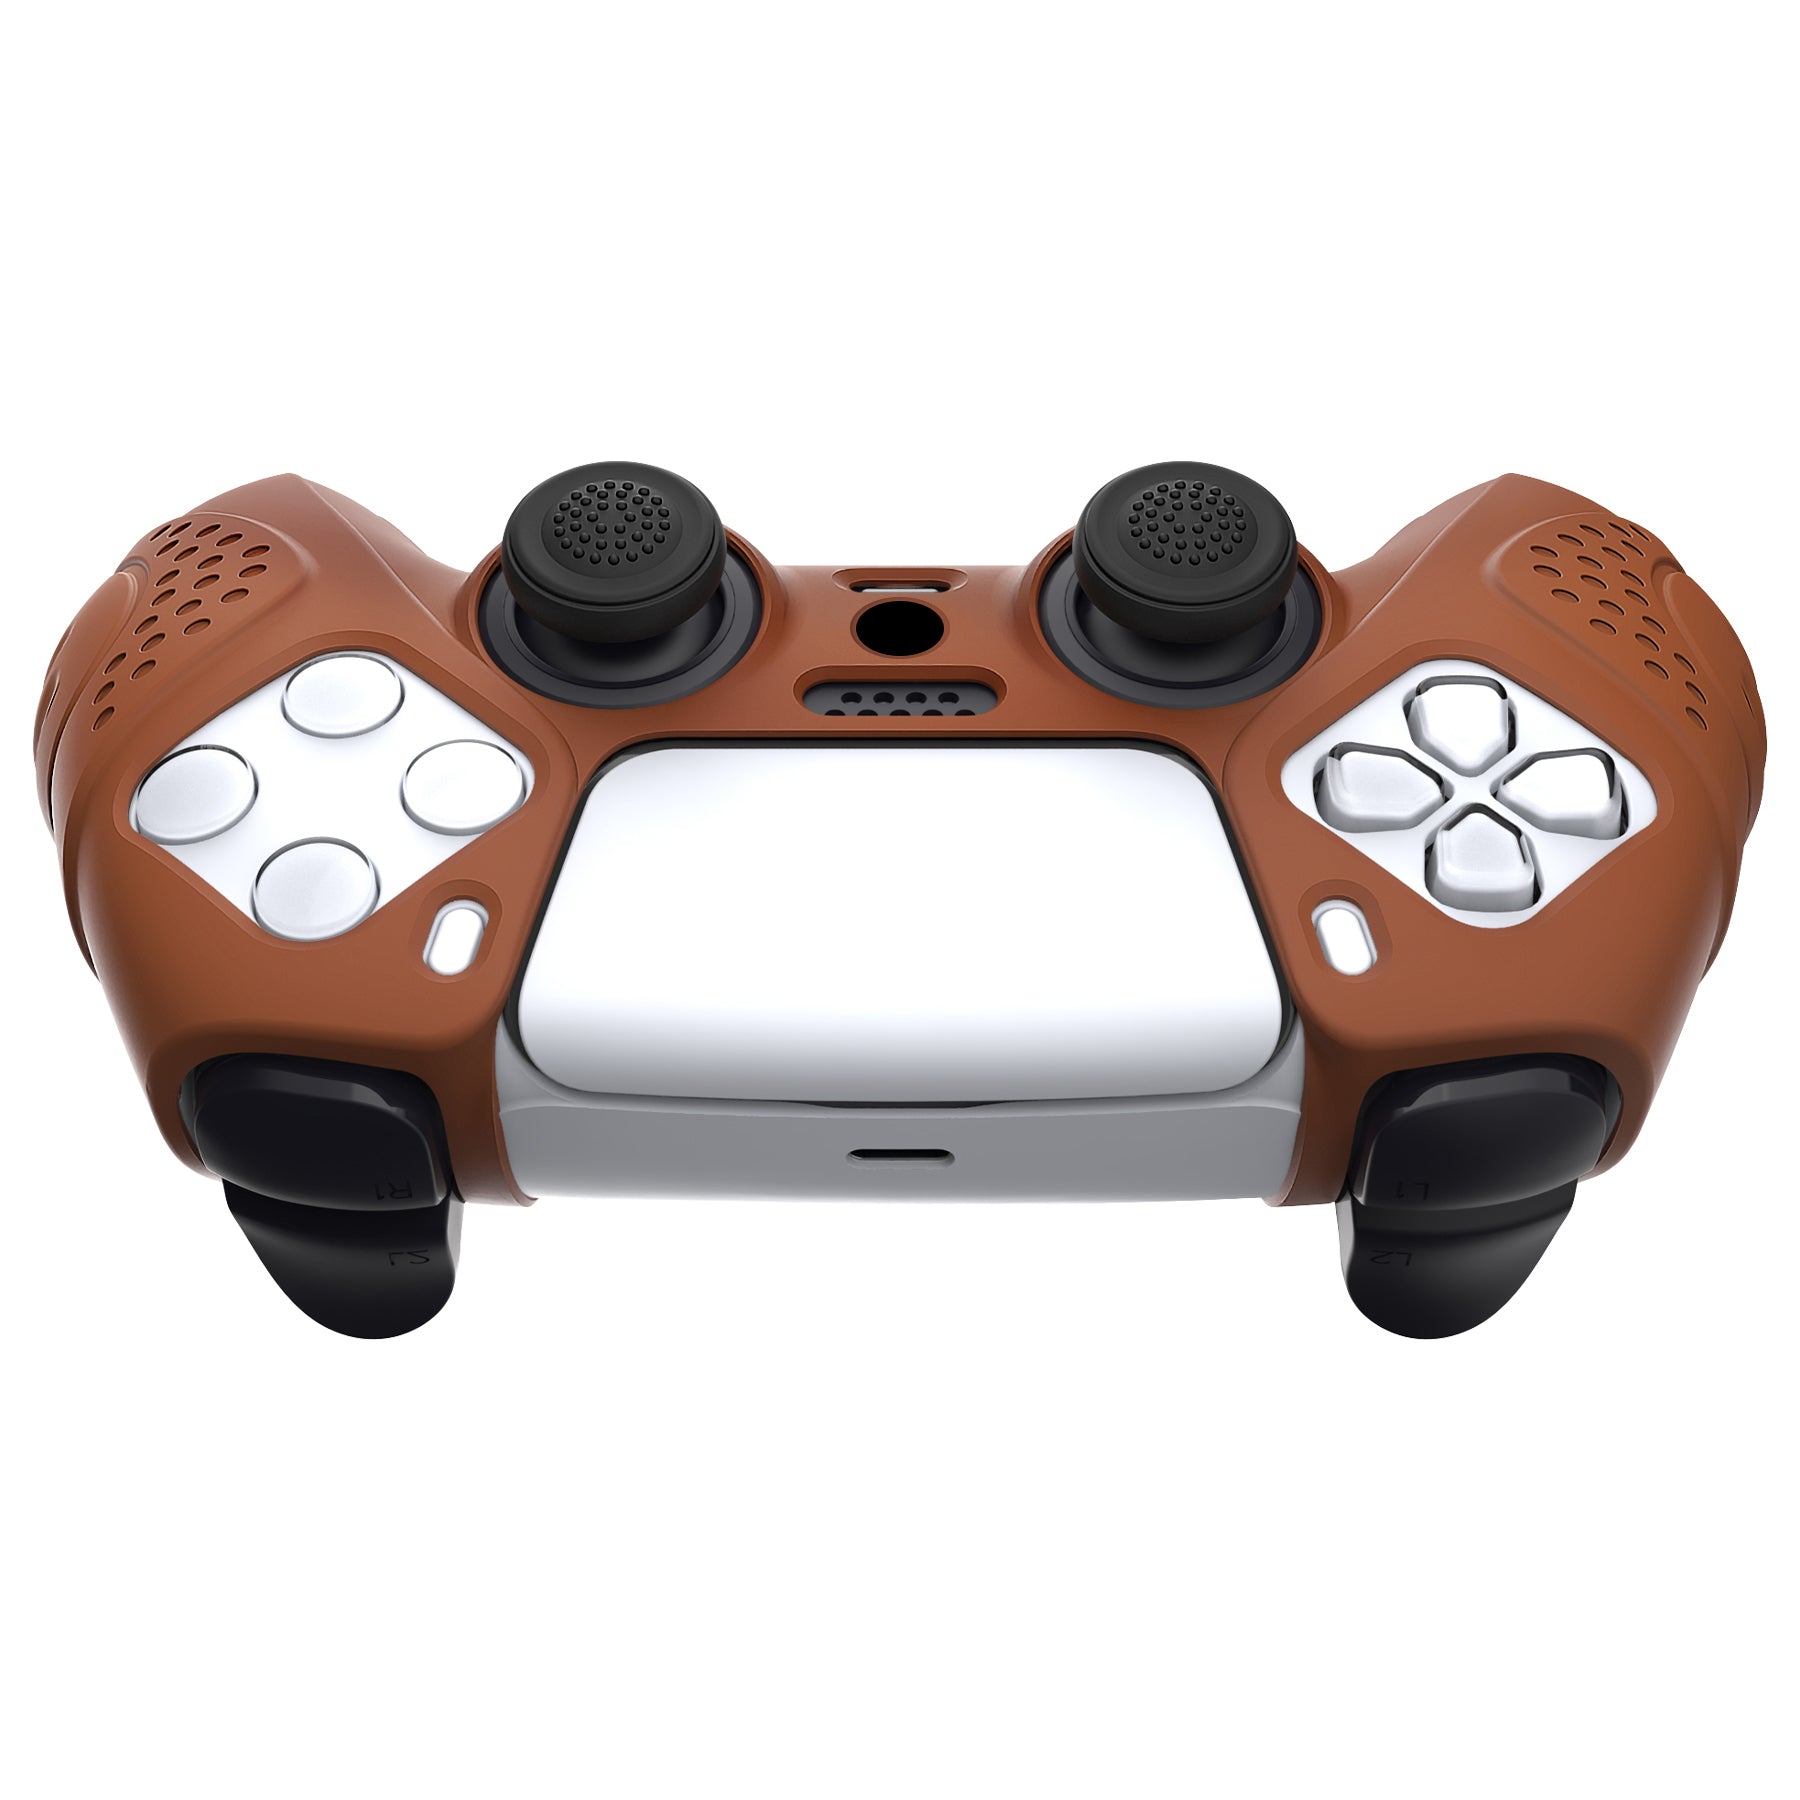 PlayVital Guardian Edition Anti-Slip Silicone Cover Skin with Thumb Grip Caps for PS5 Wireless Controller - Signal Brown - YHPF025 PlayVital